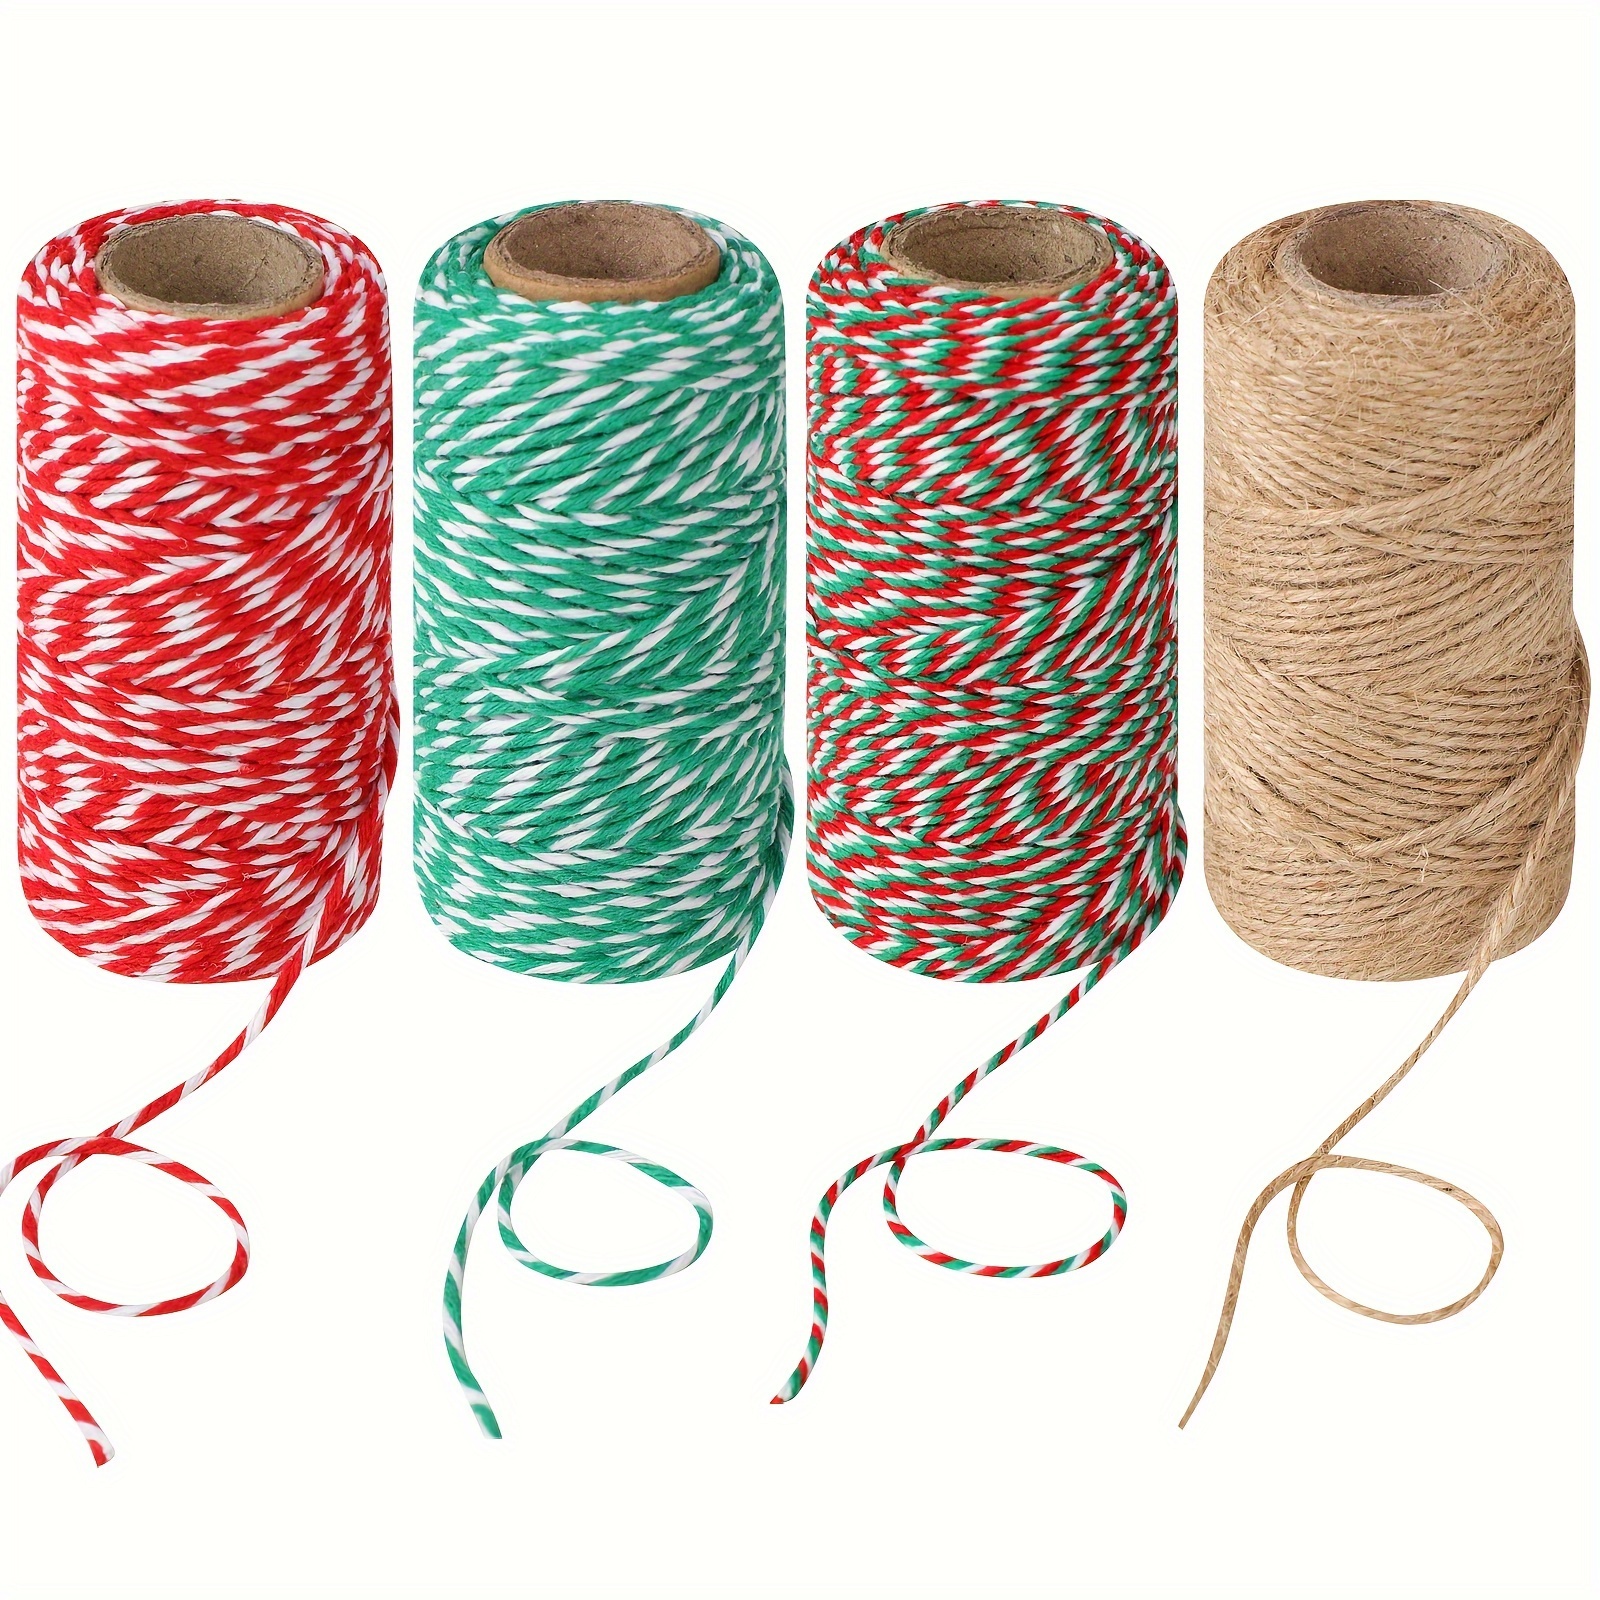 Red and White Twine, 656 Feet 2Mm Cotton Bakers Twine String for